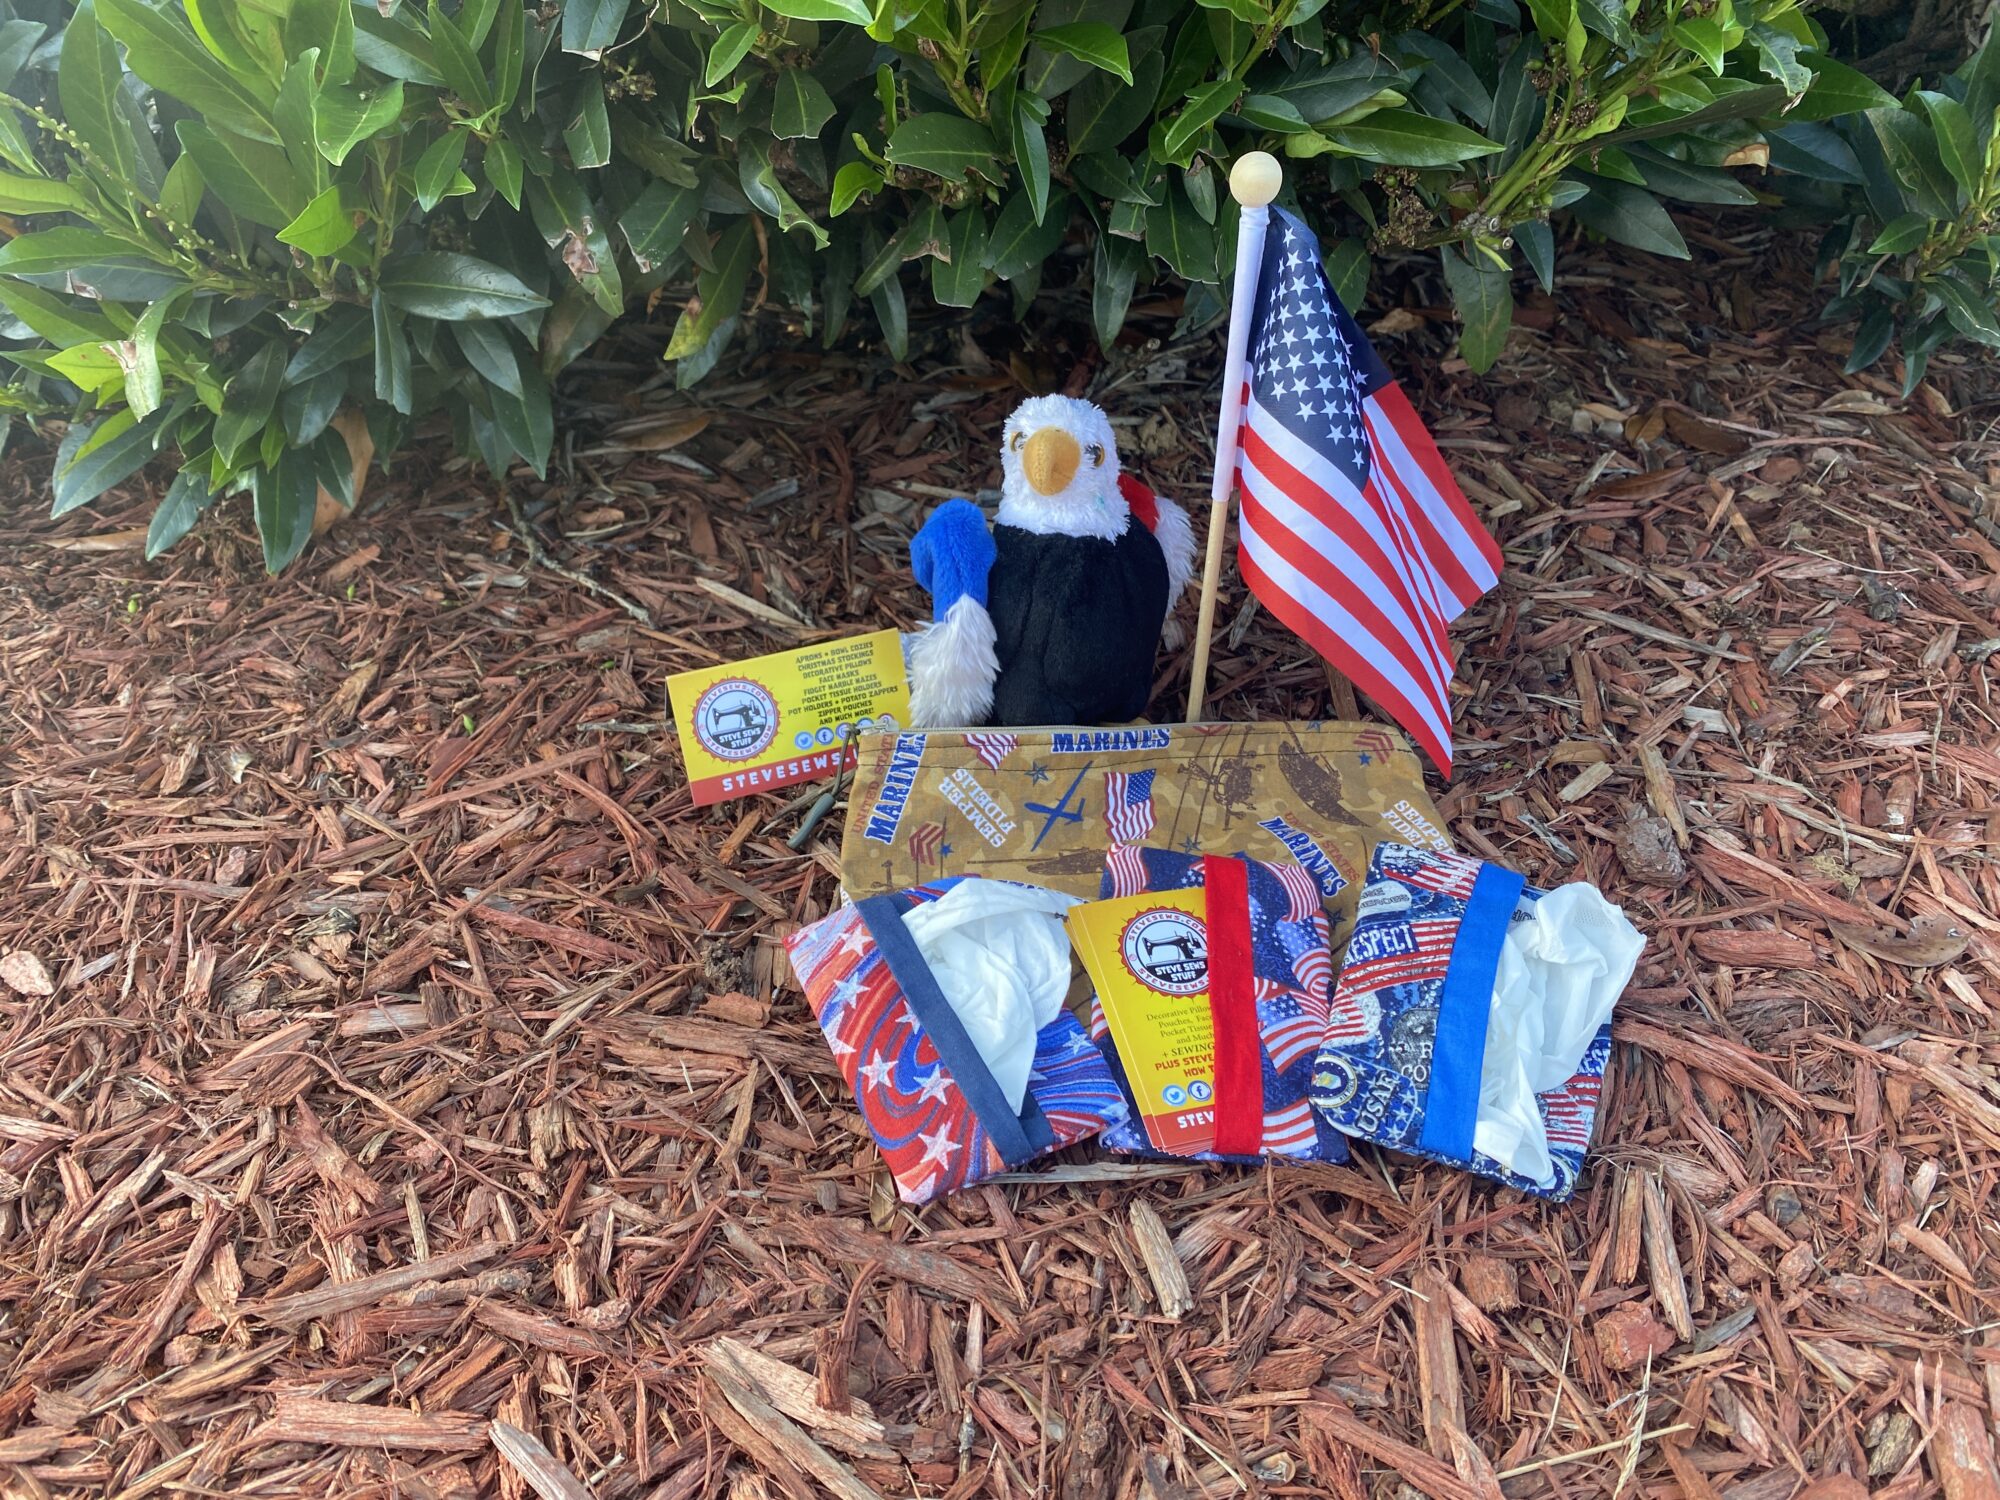 Free the Eagle is a Ty Original Beanie Baby. He is showing off some of the patriotic products available at Steve Sews. 



Read more: https://stevesews.com/memorial-day/#ixzz7UnA9jHkA